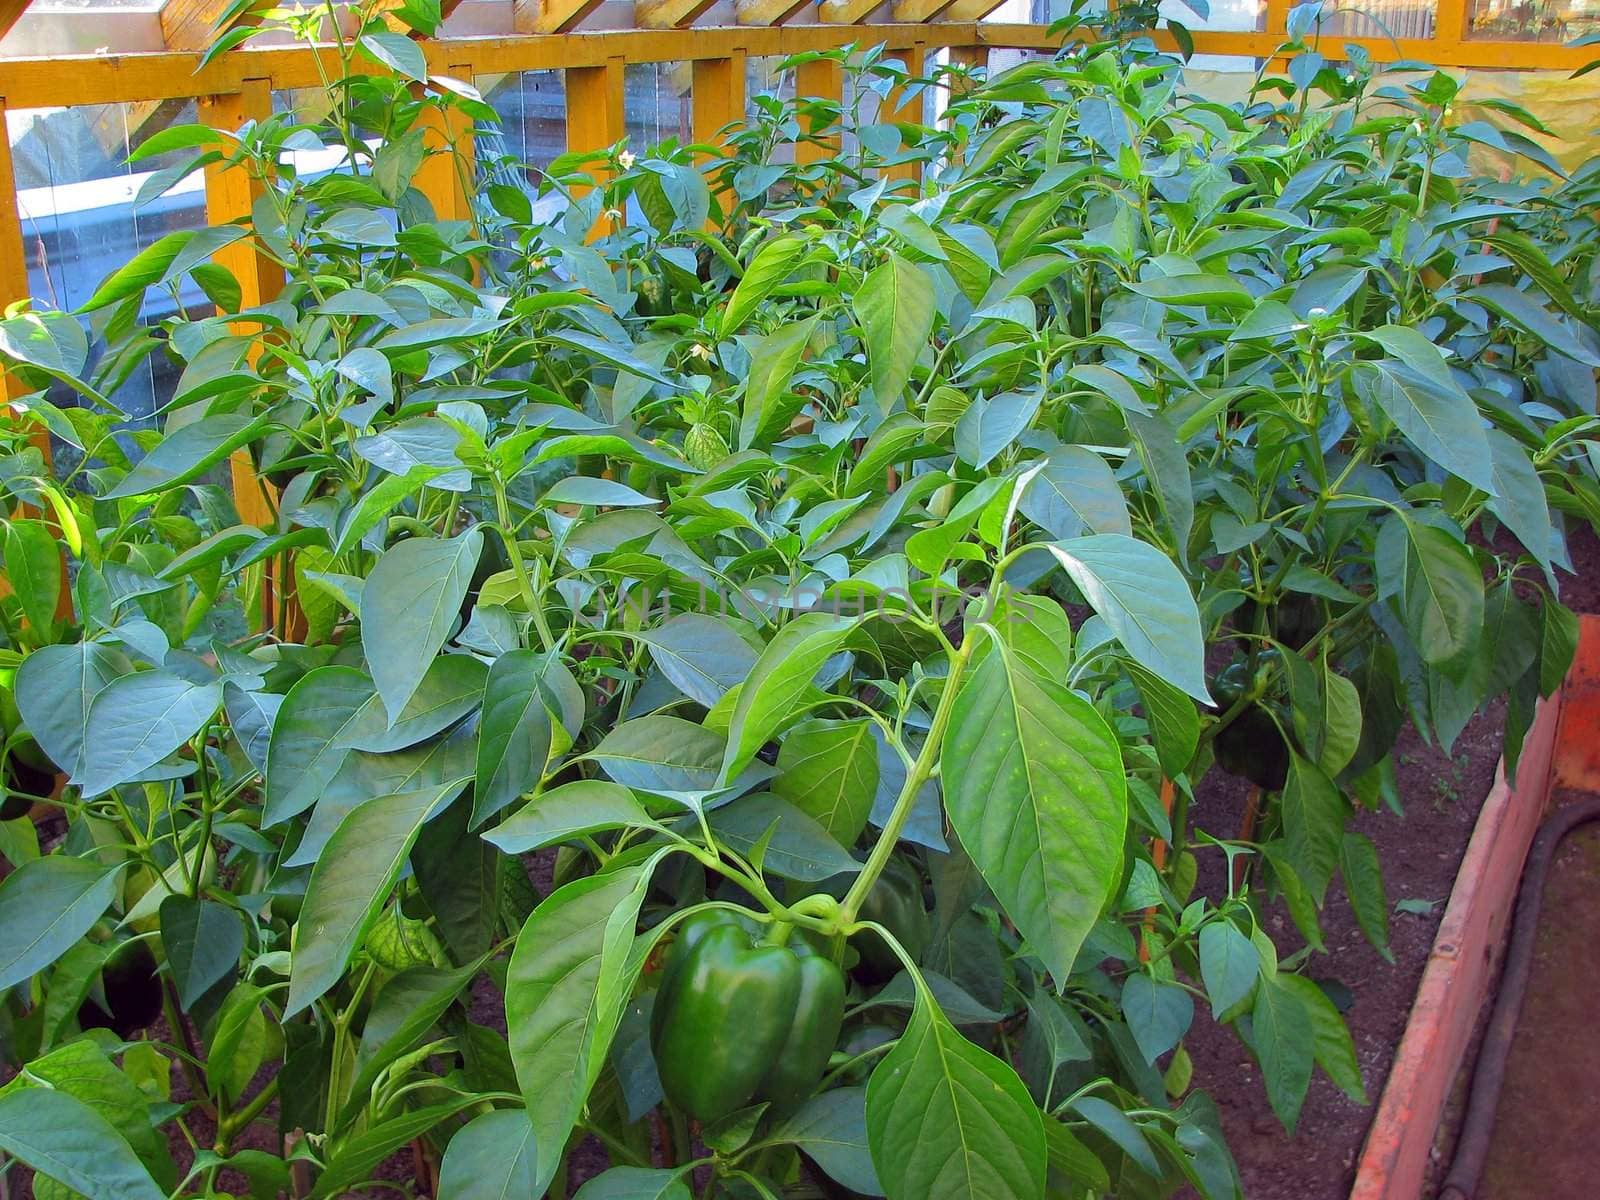 lot of green pepper plants in the greenhouse